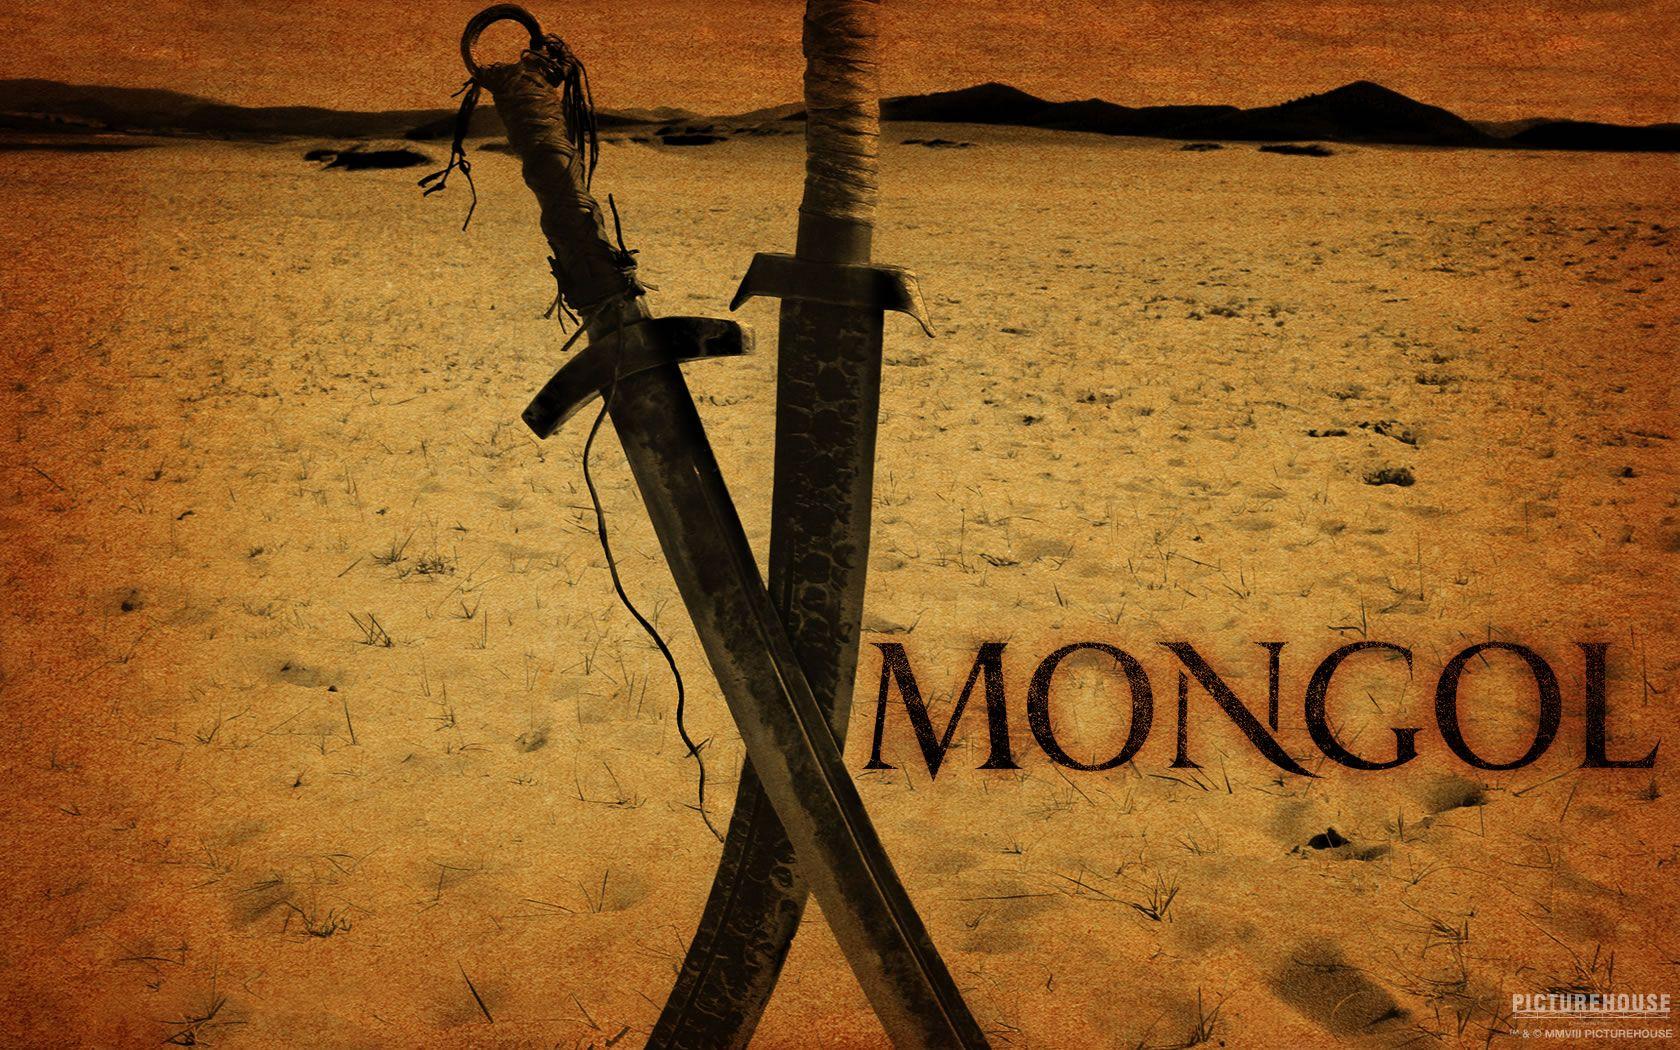 Mongol 004. Free Desktop Wallpaper for Widescreen, HD and Mobile